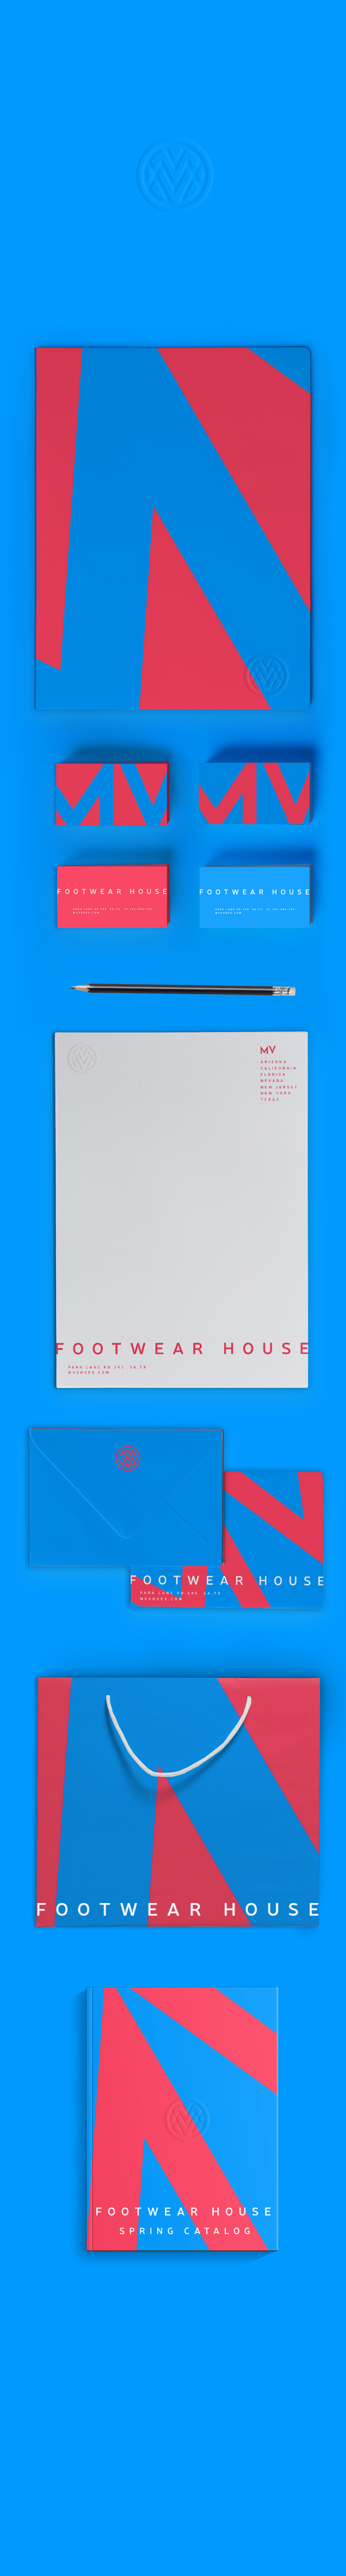 shoes brand store logo logofolio zapatos stationary sale colorfull MV foot wear house design Love